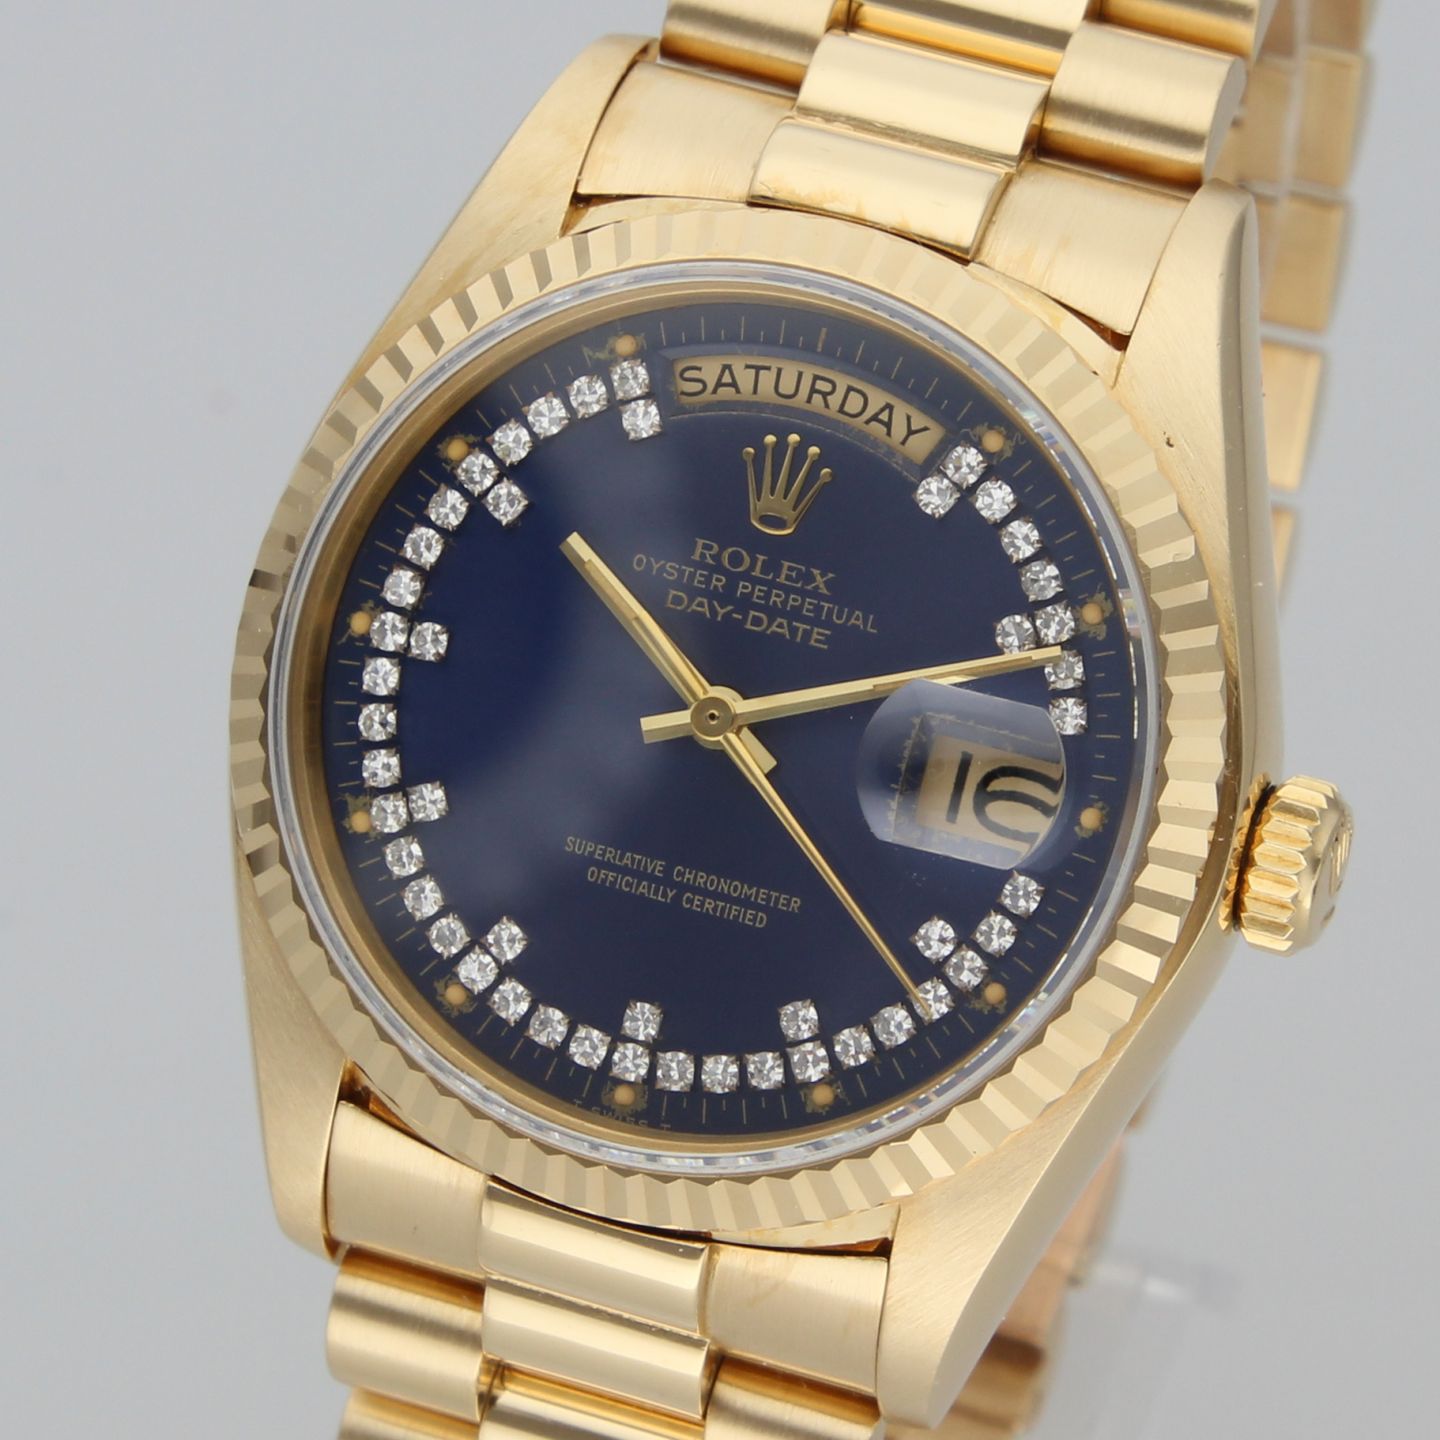 Rolex Day-Date 36 18038 (1981) - Blue dial 36 mm Yellow Gold case (4/8)